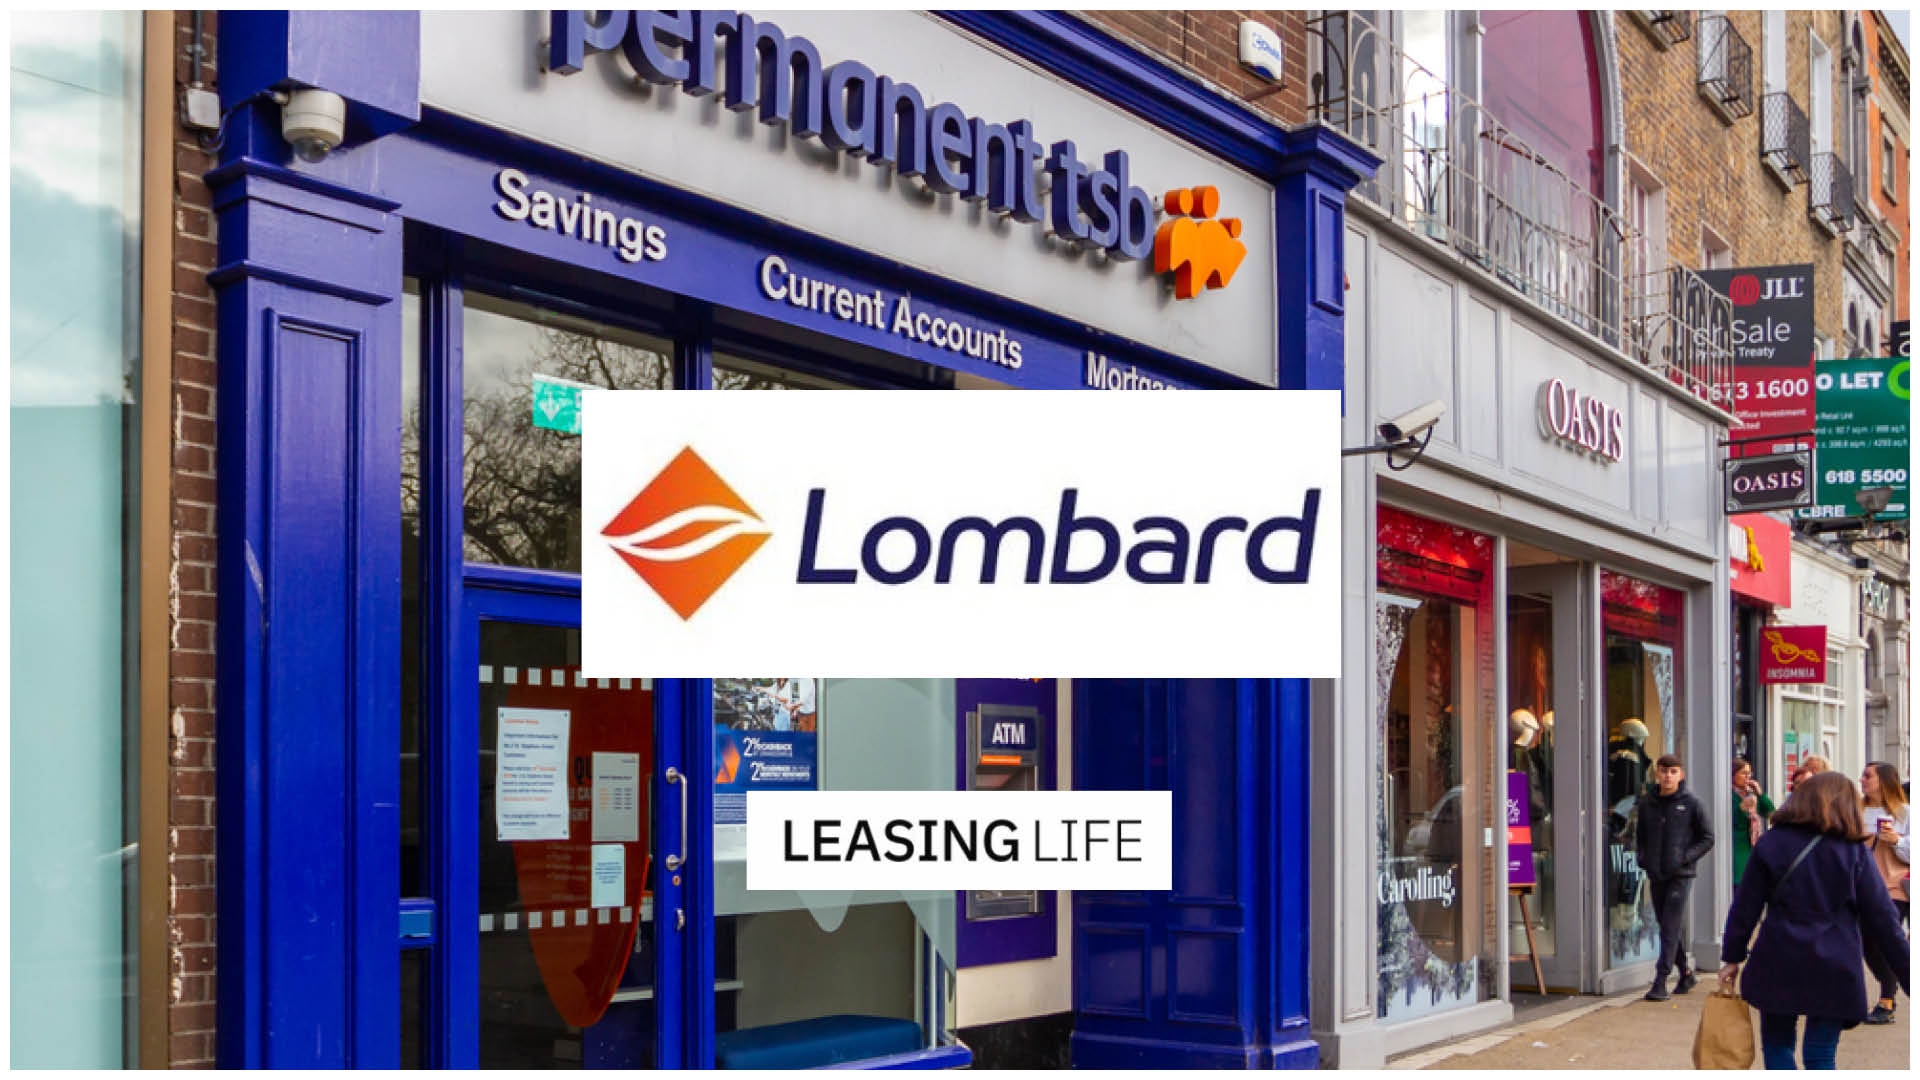 Permanent TSB to buy Ulster Bank's €400m Lombard business from NatWest